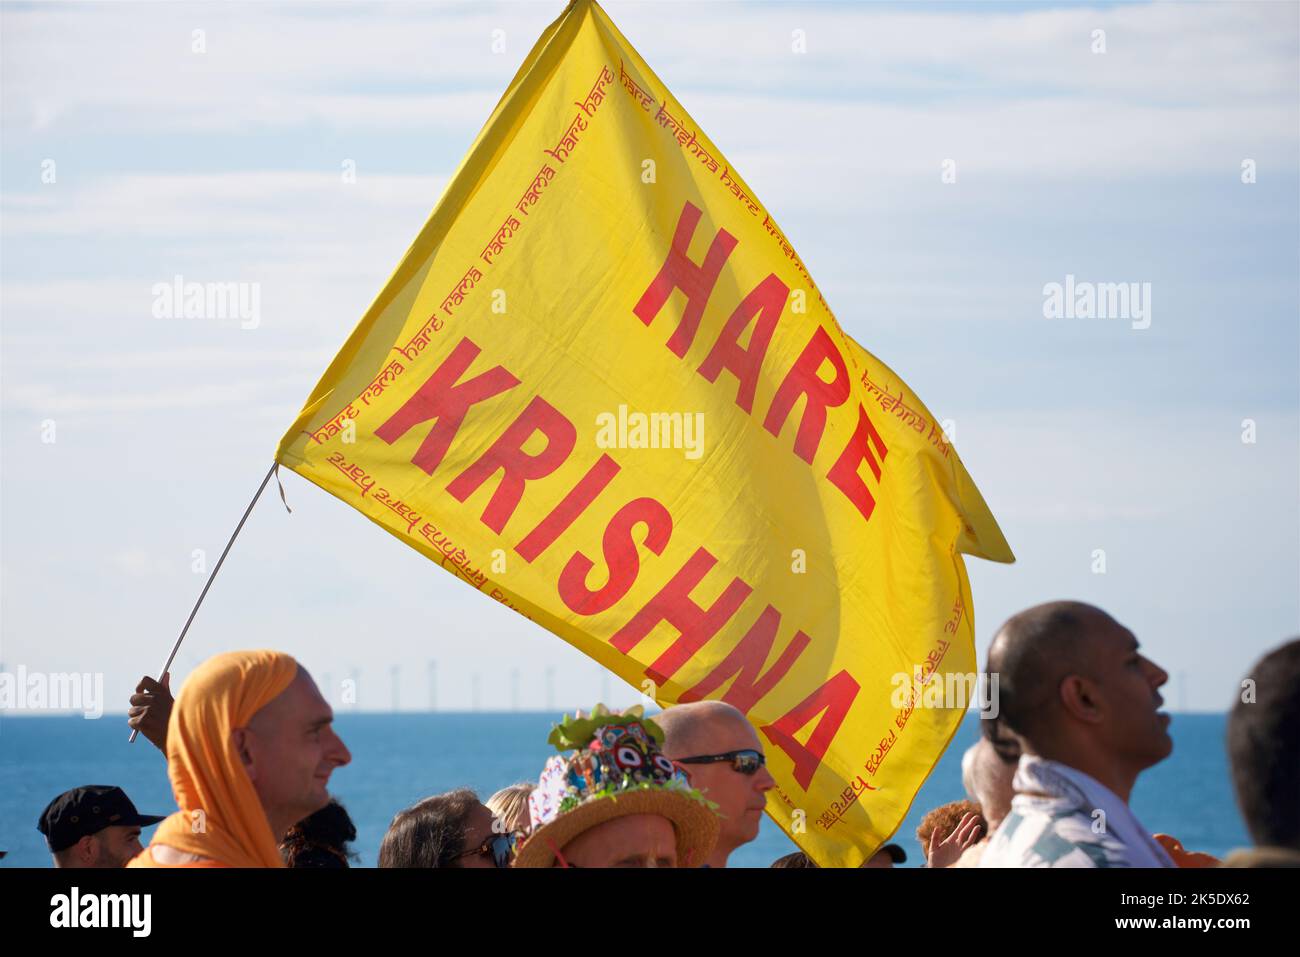 Hare Krishna flag. The annual Rathayatra Festival for Lord Krishna and his devotees promenades along Hove esplanade each year. Krishna in his form of Jagannatha is pulled along on a large wooden juggernaut. Stock Photo